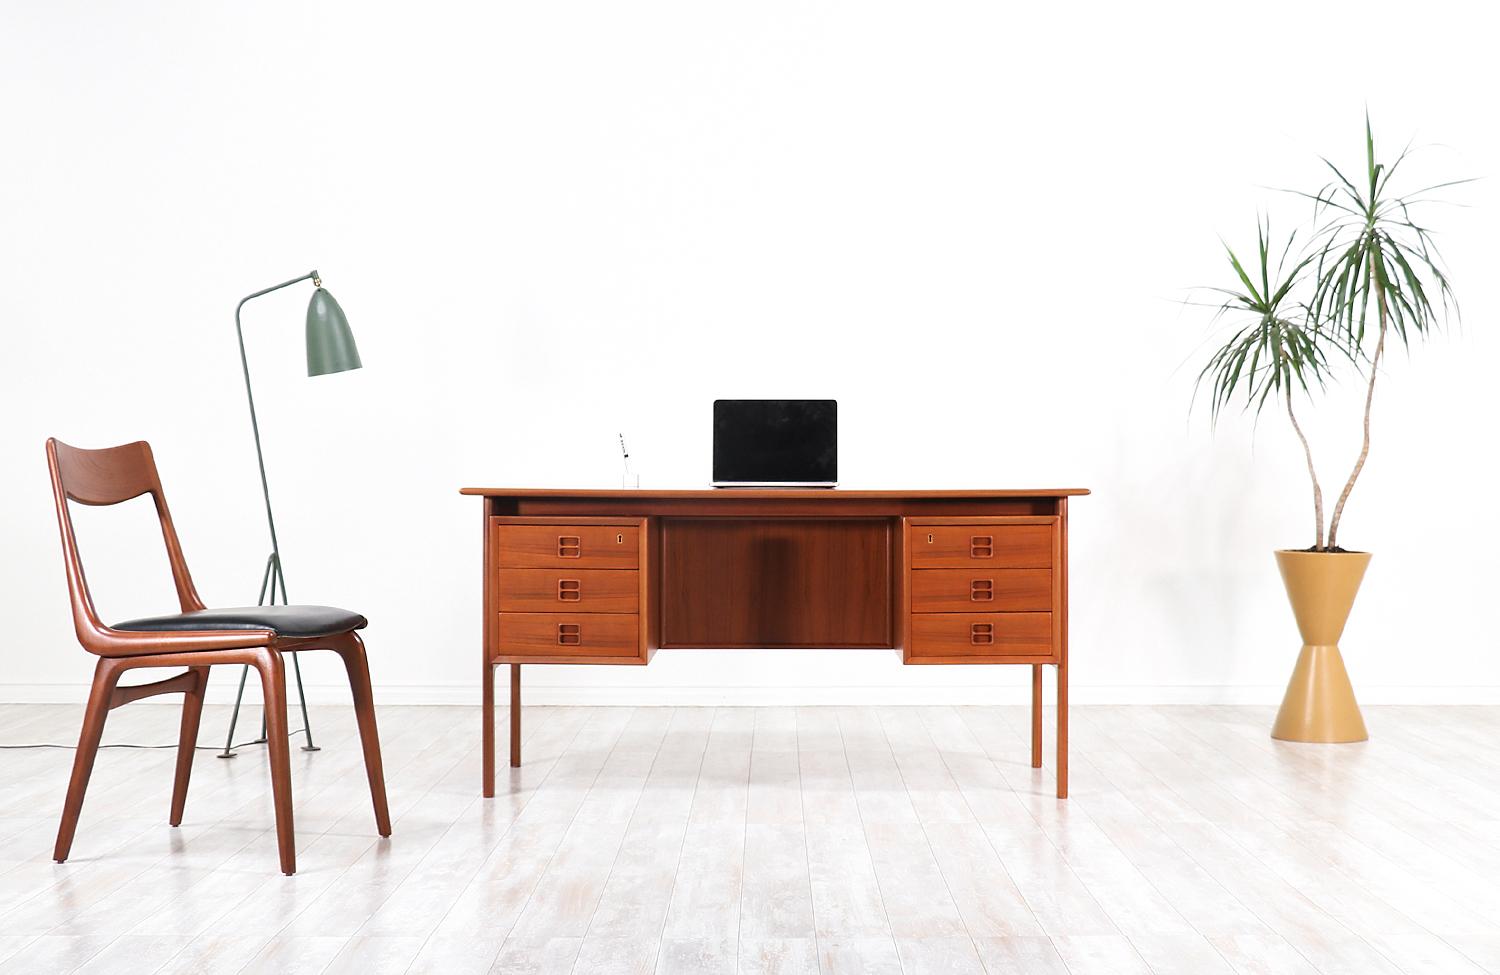 Elegant modern executive desk designed by Arne Vodder for Sibast in Denmark, circa 1950s. This striking design features a teak wood frame with three spacious drawers on each side and an open bookshelf in the back for additional storage and display